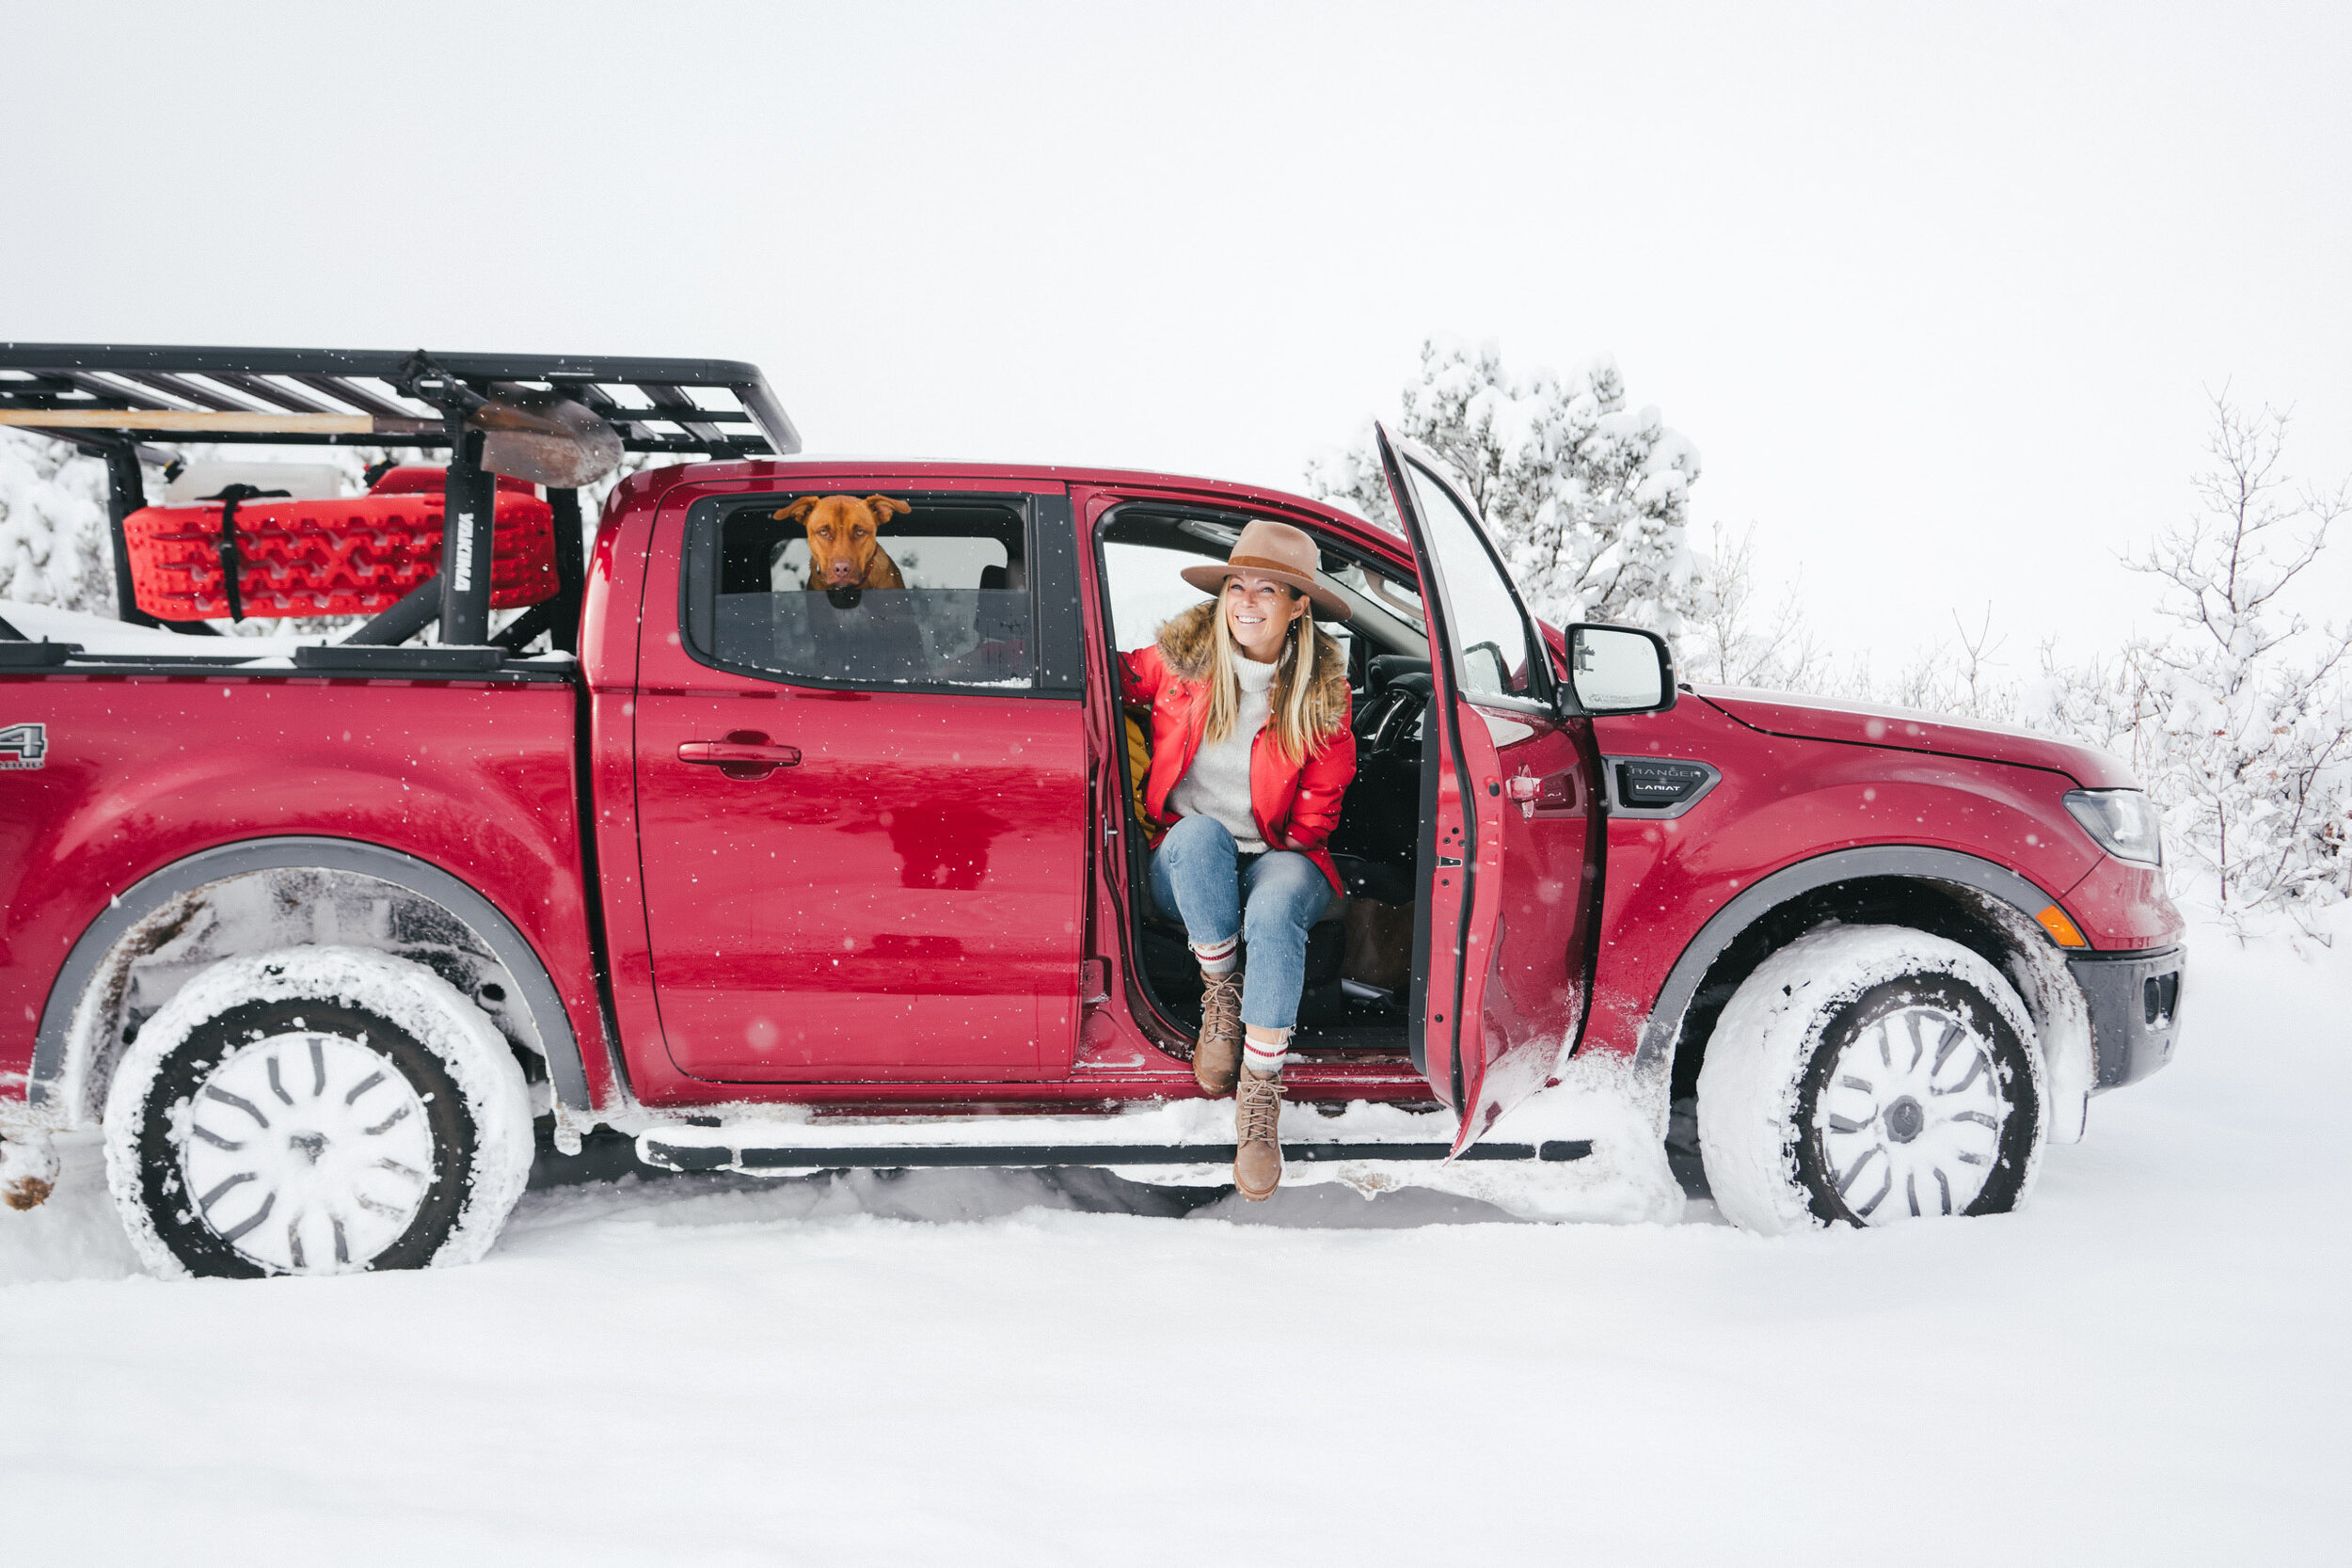 A woman sits in the passenger door of a red pickup truck in a blizzard snowstorm